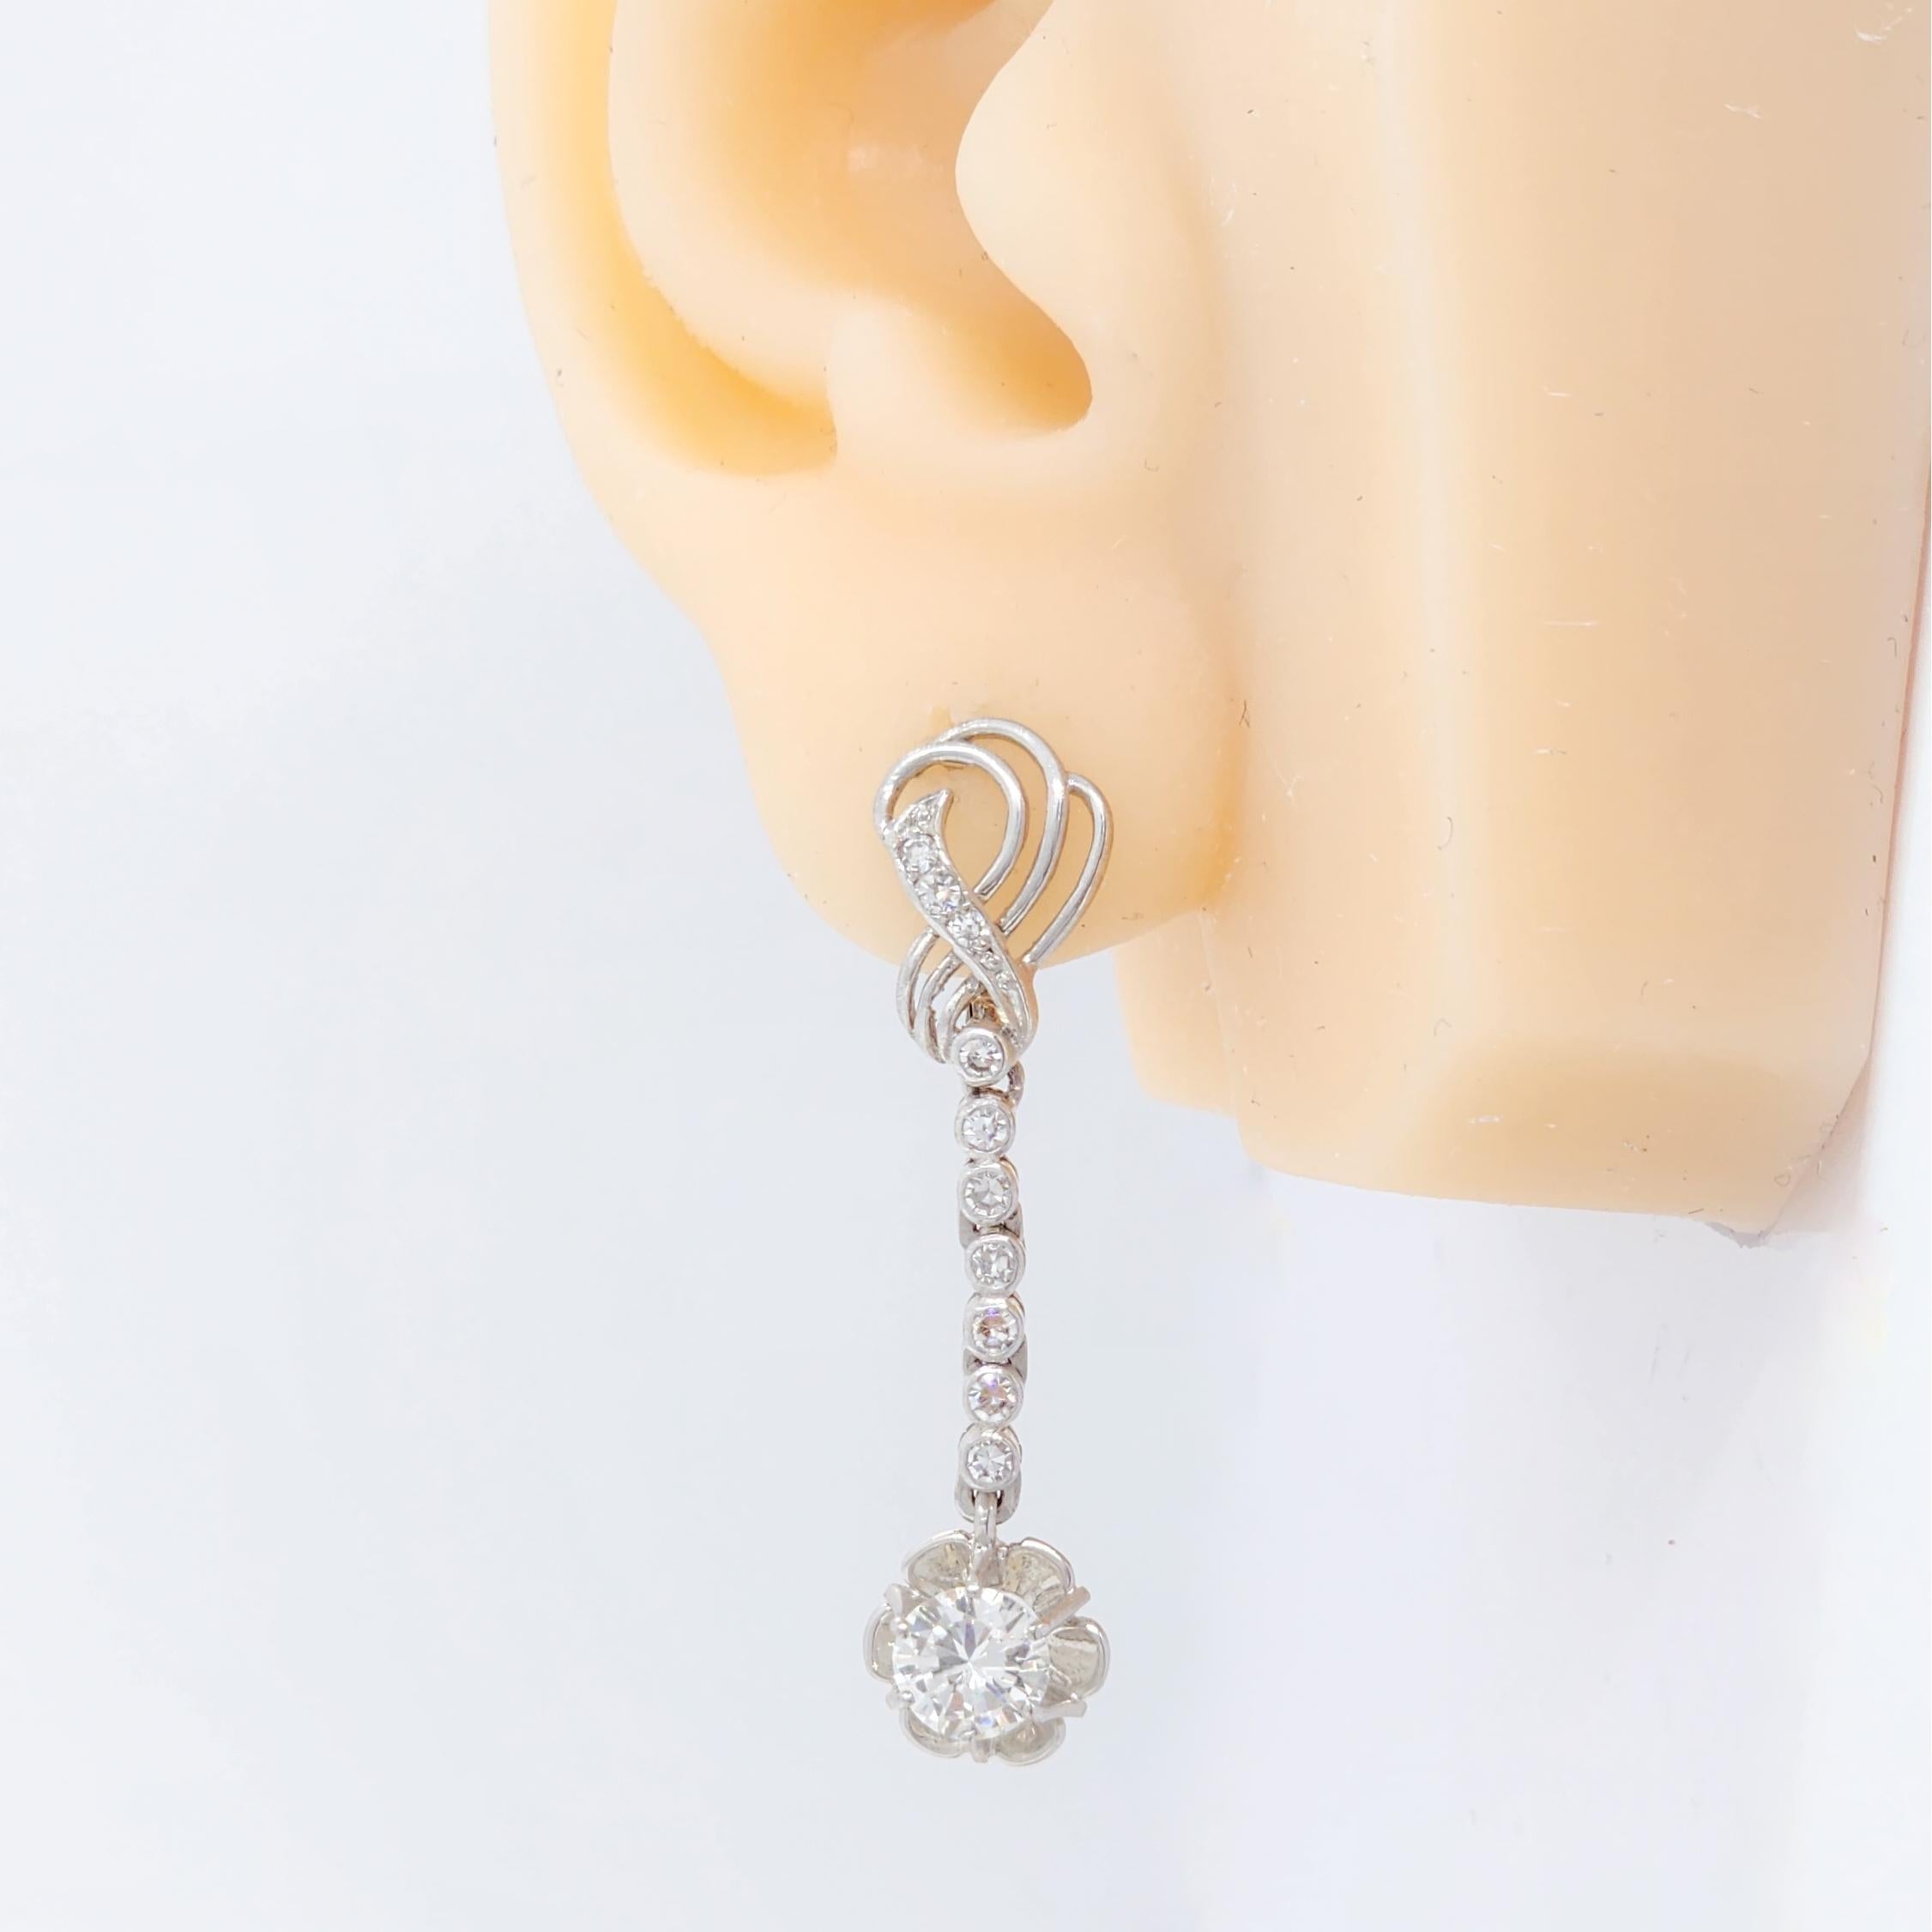 Beautiful white diamond round dangle earrings with good quality diamonds.  Handmade in 18k white gold.  Approximately 1.50 ct. of diamonds.